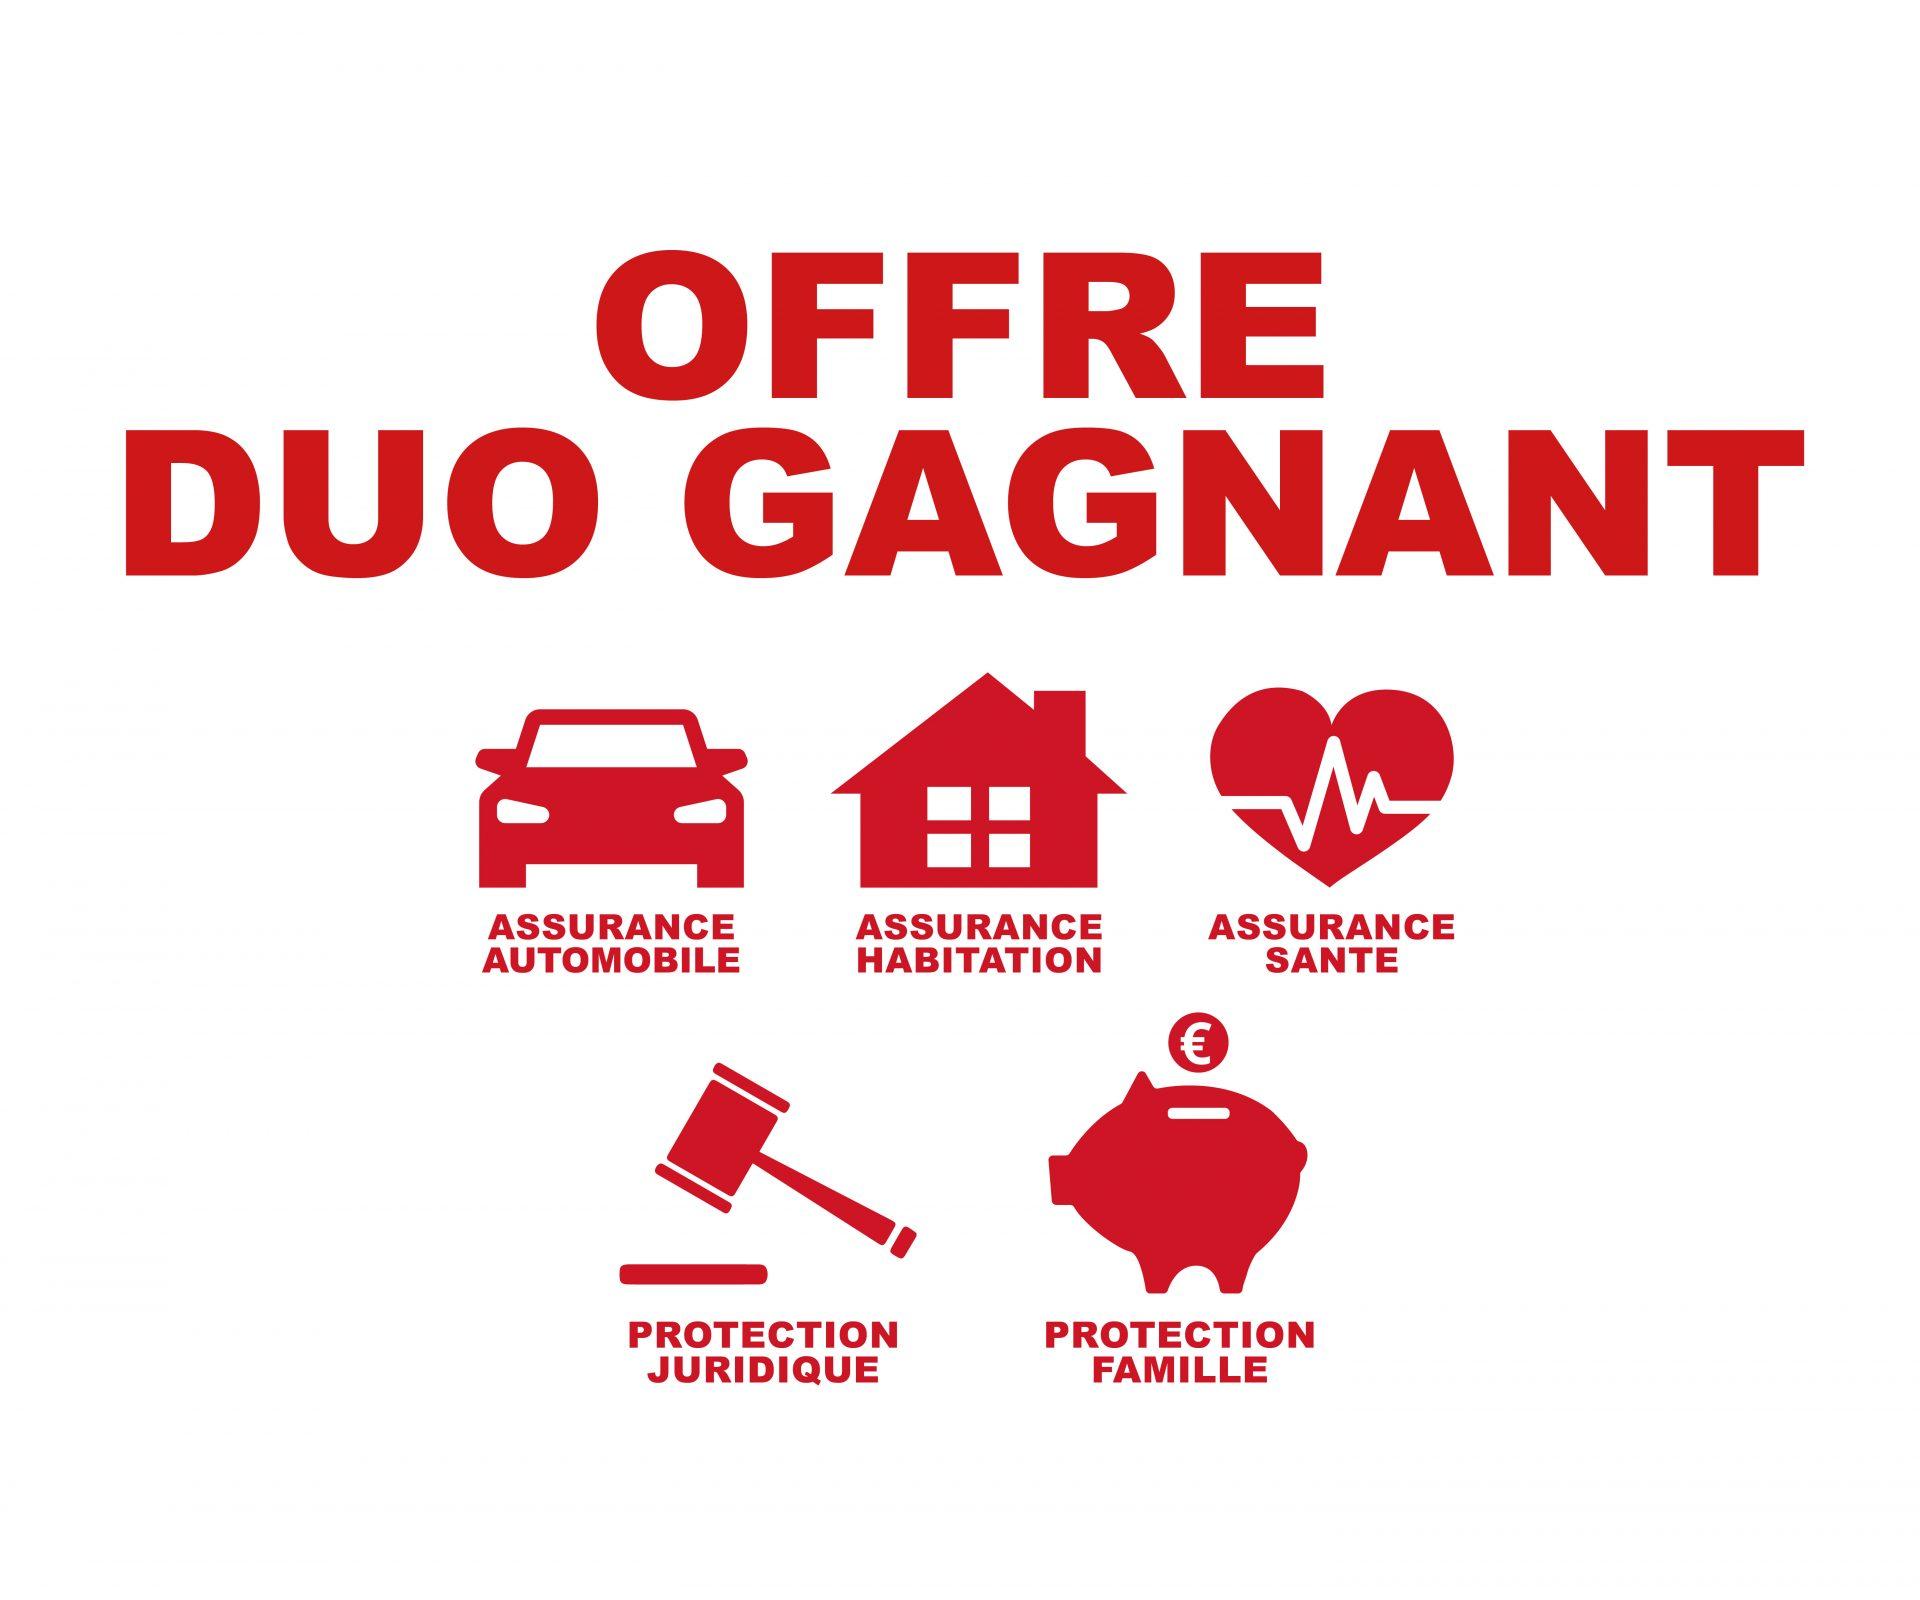 Offre Duo Gagnant